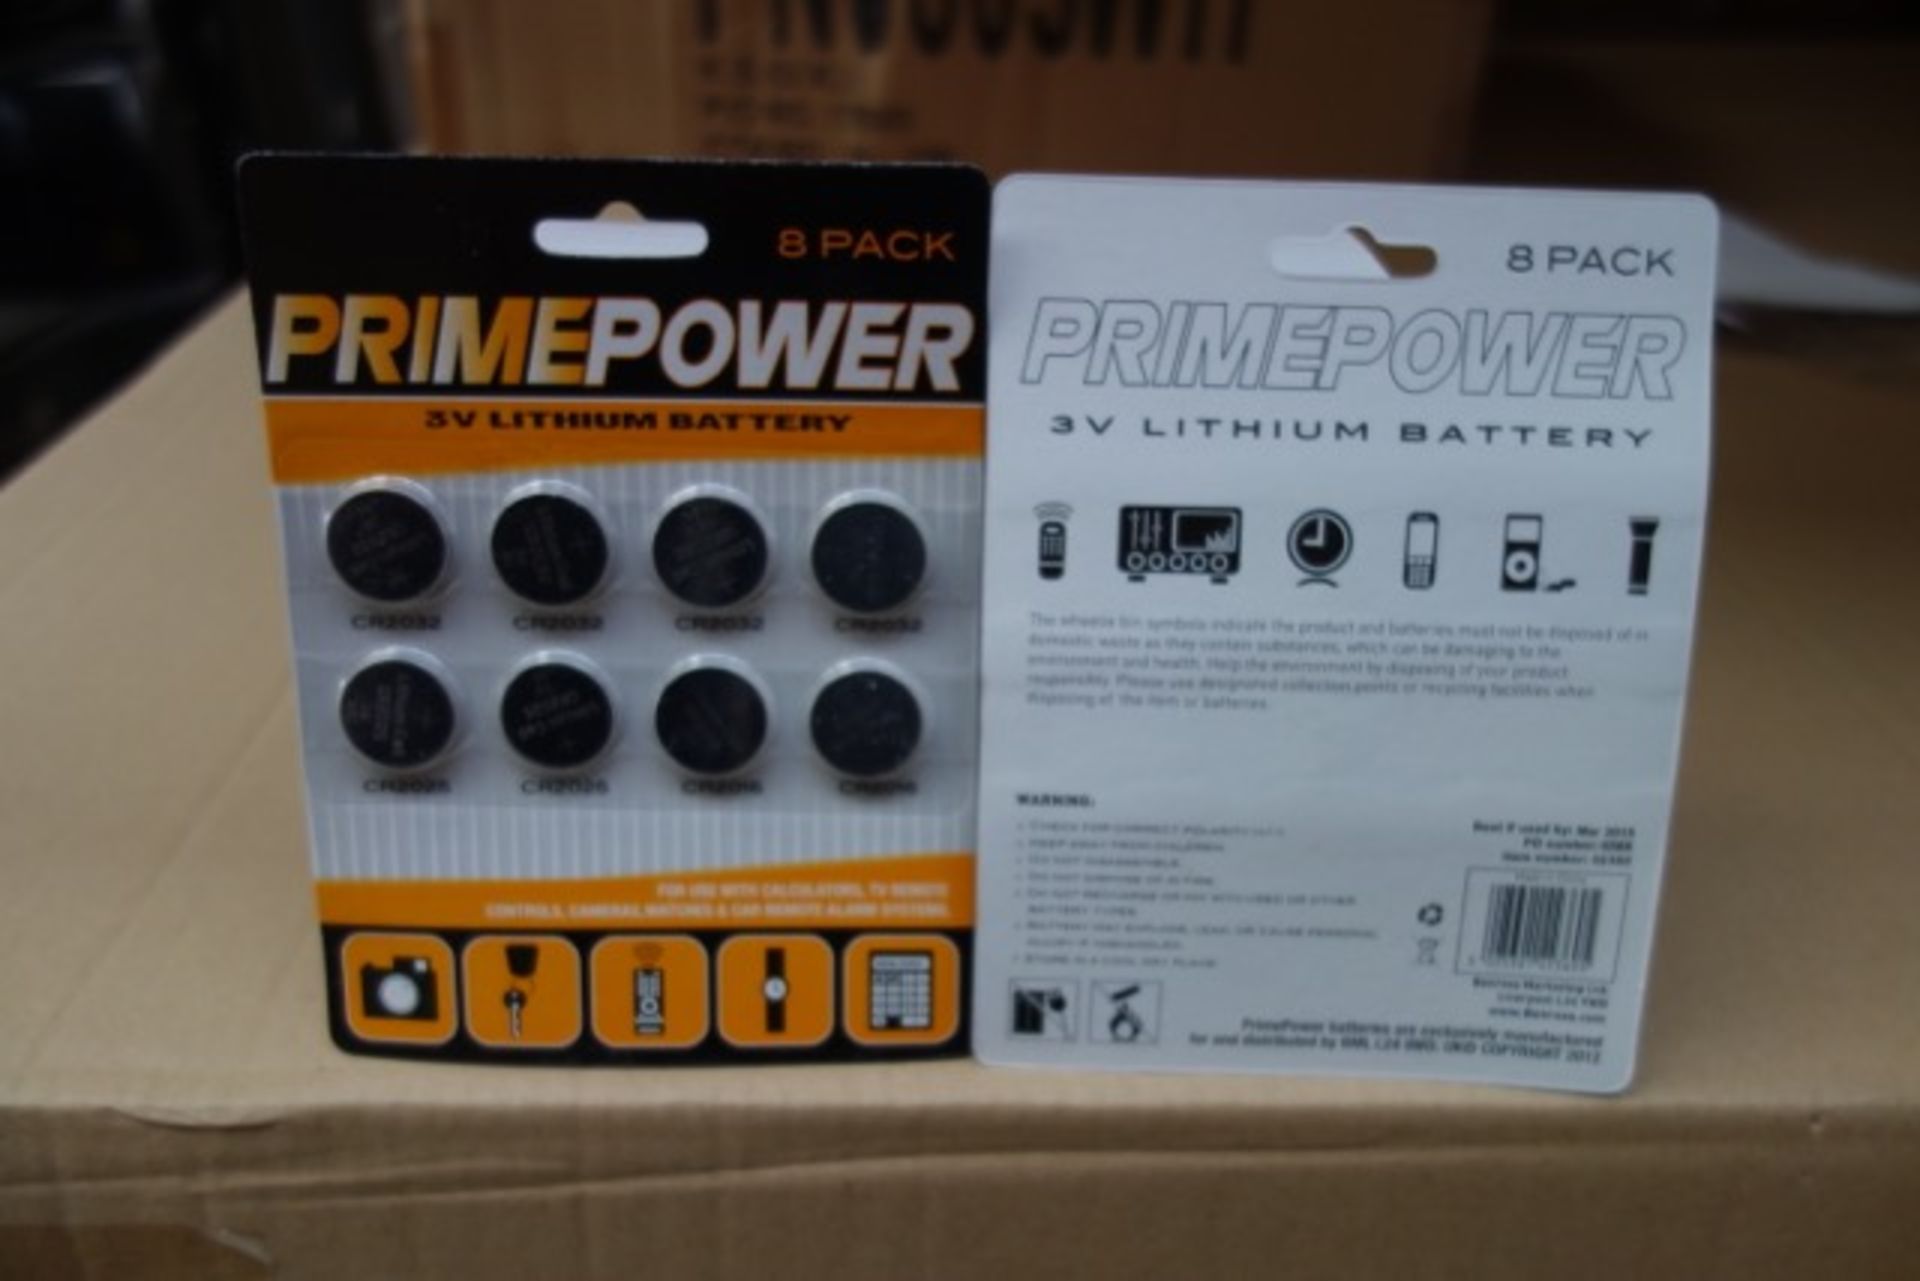 480 x Packs of 8 Primepower 3V Lithium Batteries. For use with calculators, TV remote controls,